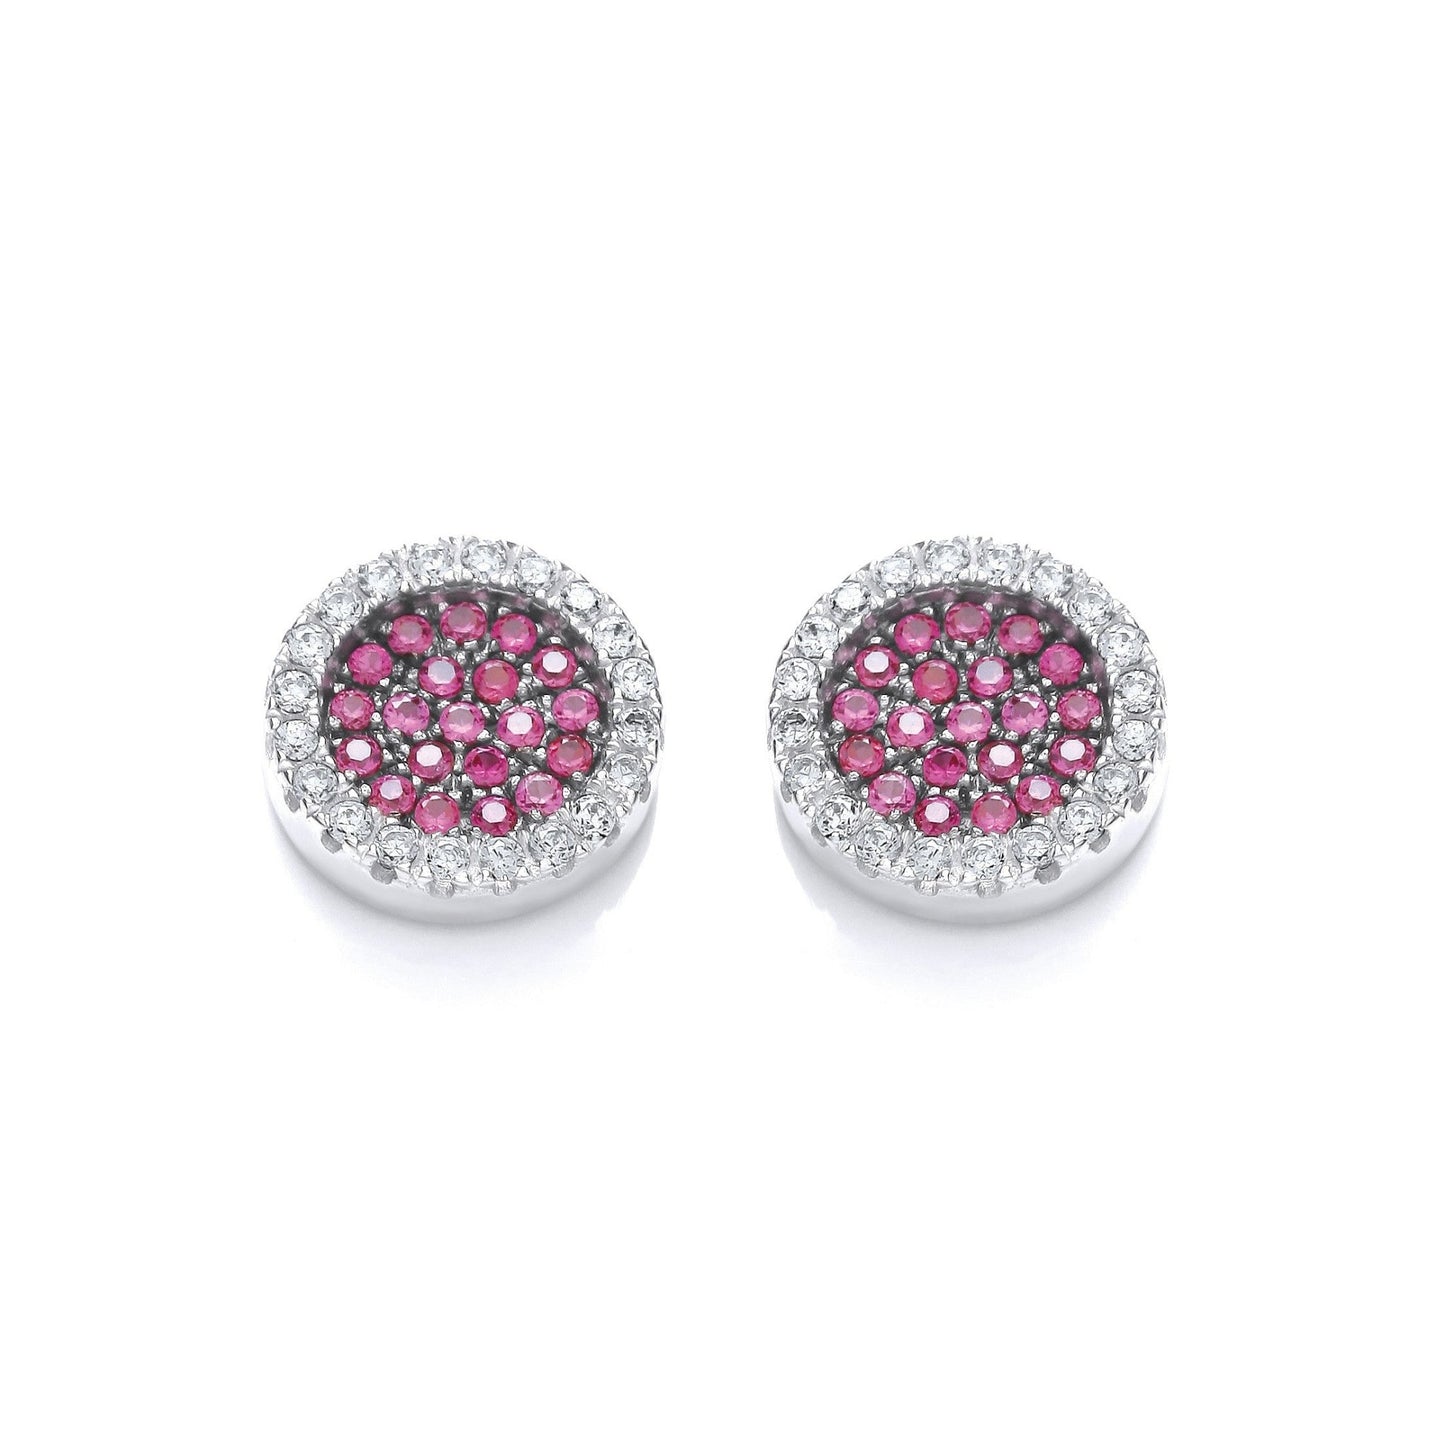 Cluster Stud 925 Sterling Silver Earrings Set With Red CZs - FJewellery